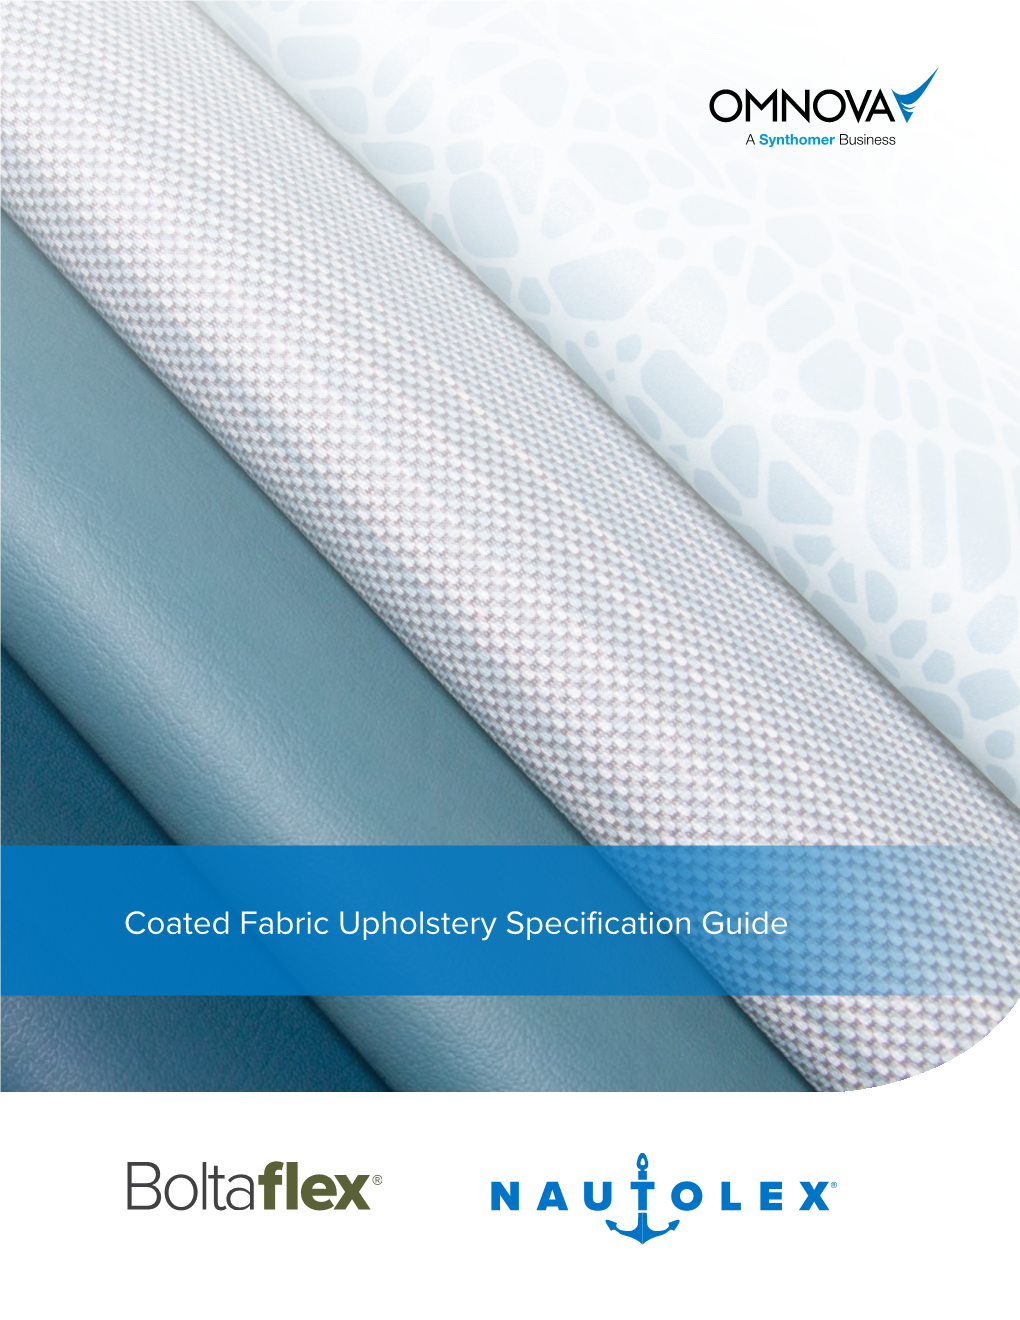 Coated Fabric Upholstery Specification Guide